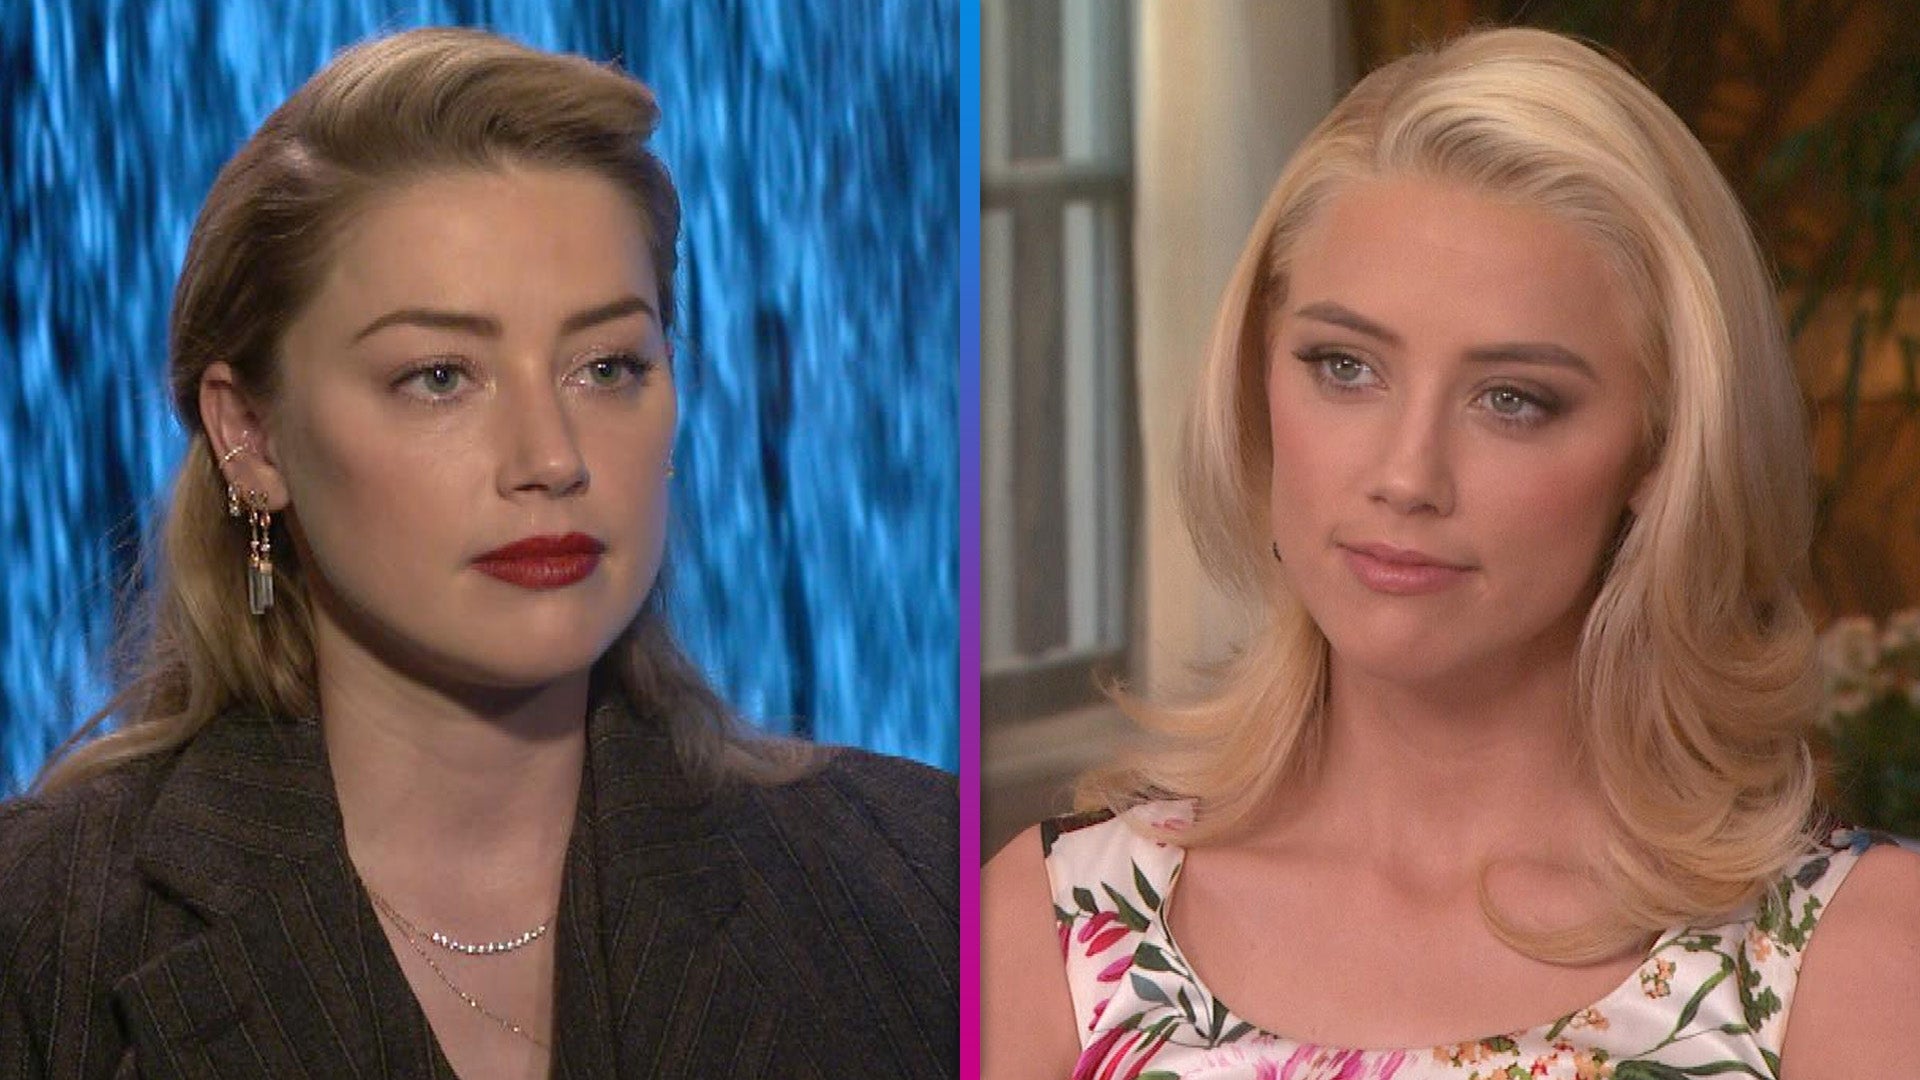 Amber Heard's Thoughts on Privacy, Relationships and Abuse Against Women (Flashback)